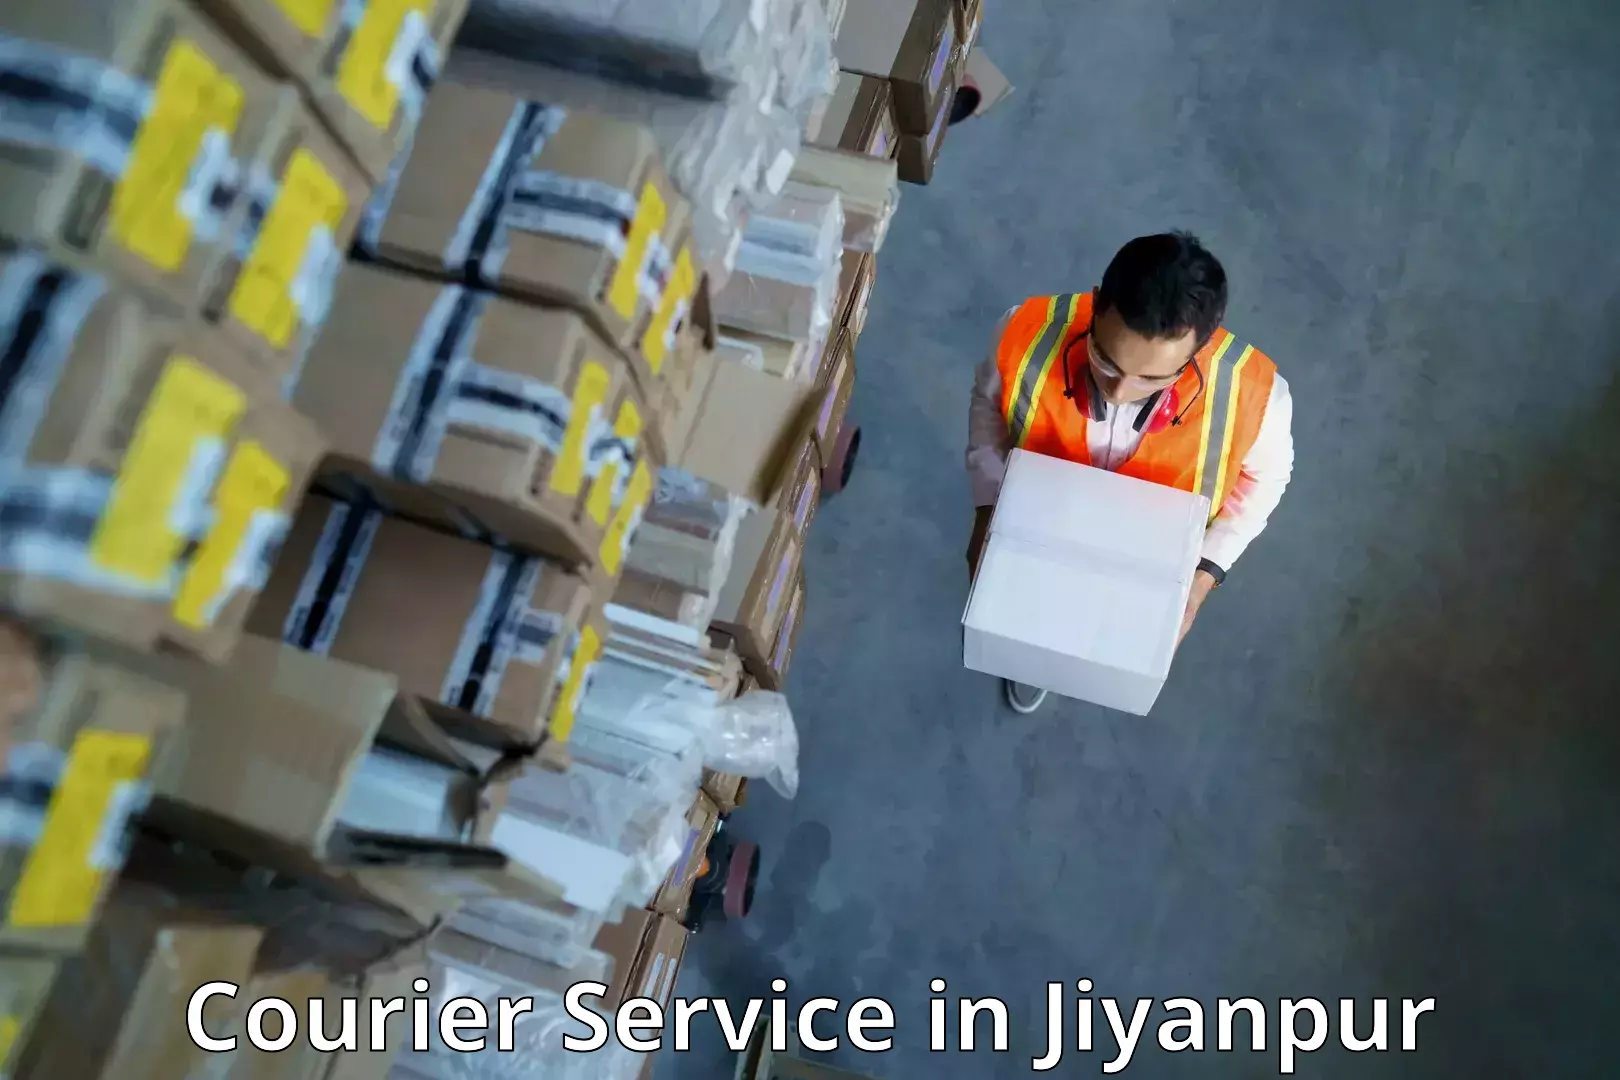 Sustainable delivery practices in Jiyanpur